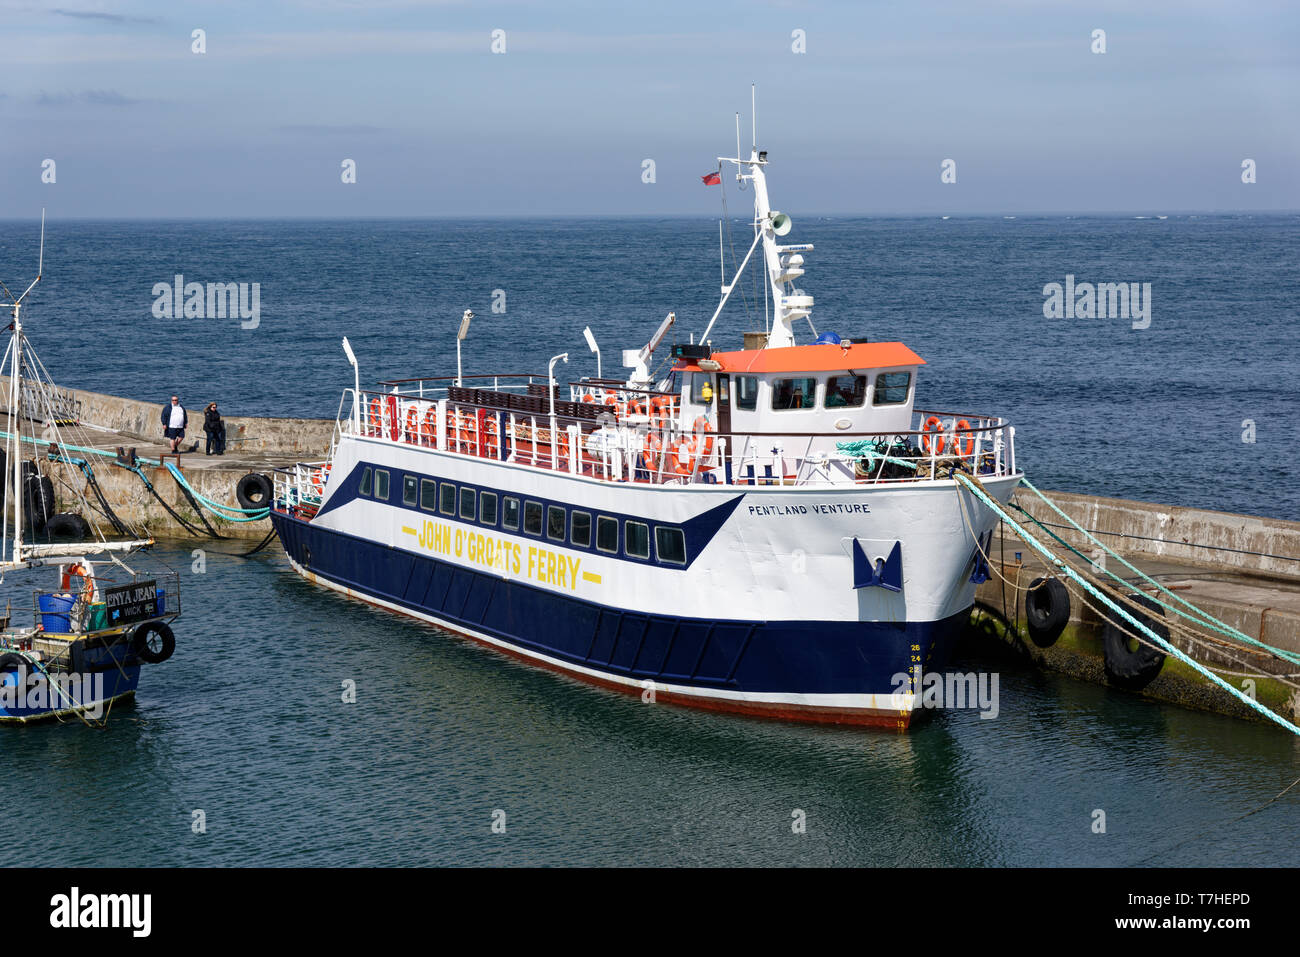 The John o' Groats Ferry, Pentland Venture moored in the small harbour at this most Northern part of the Scottish mainland. Stock Photo